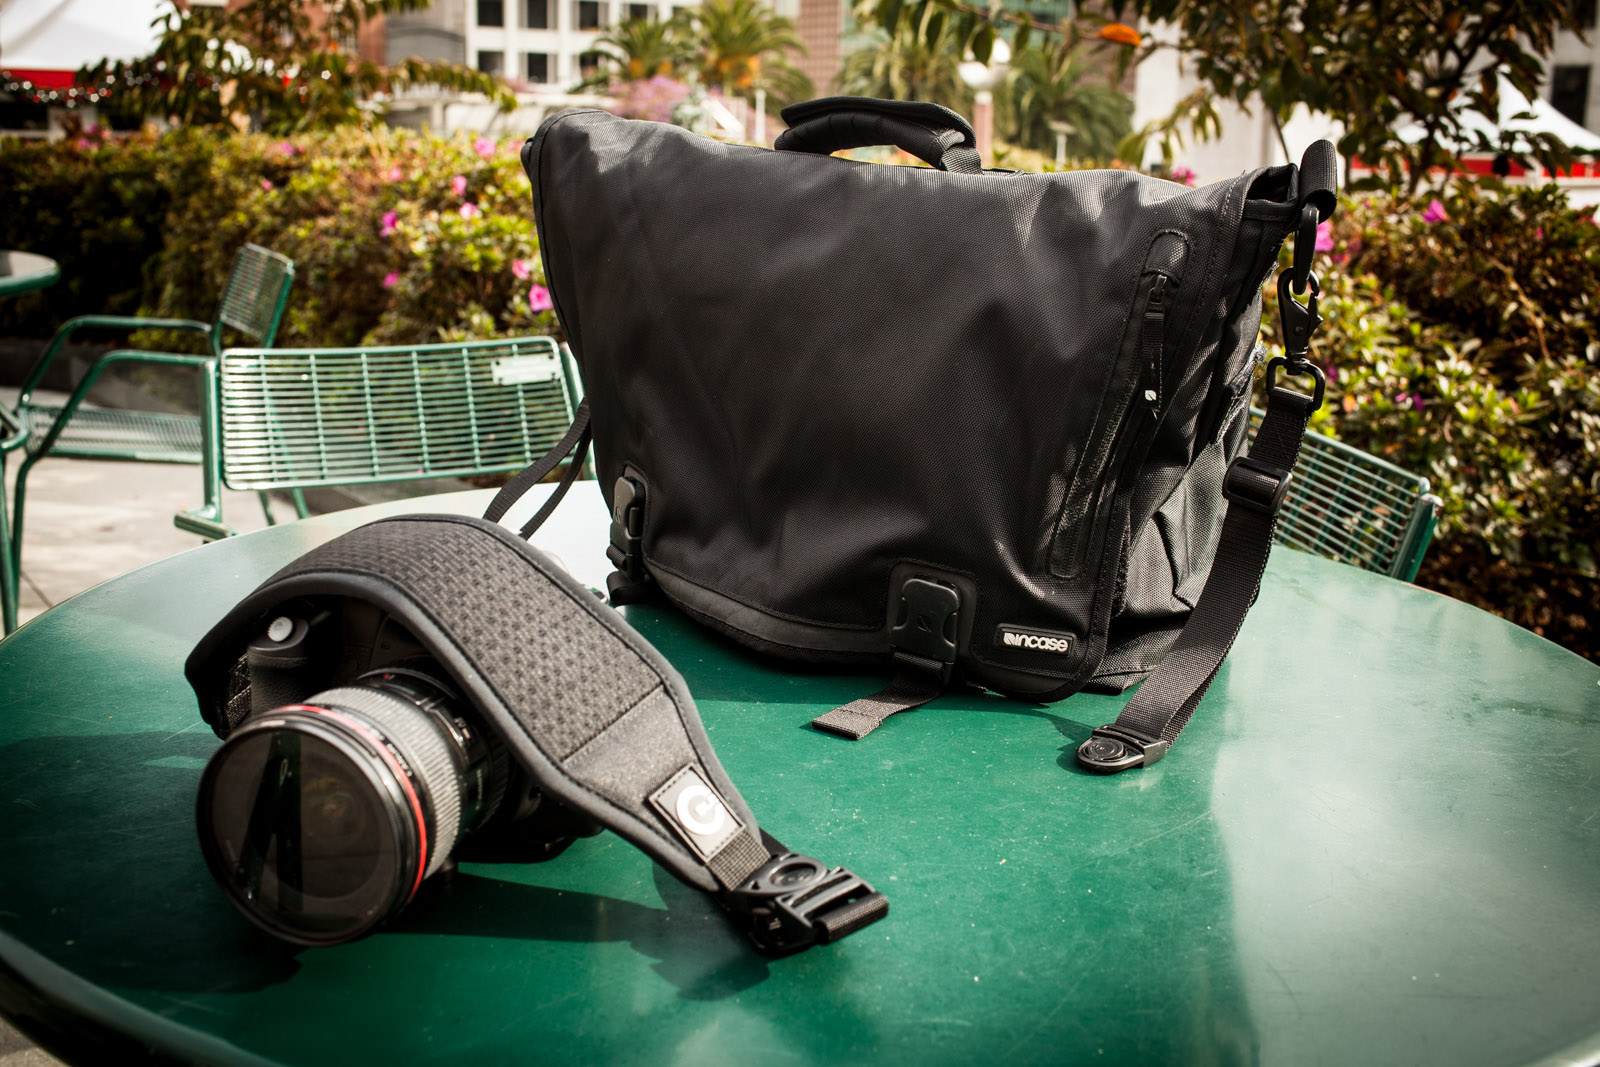 With an optional attachment, the Air Strap can be used on most bags, such as laptop bags and duffel bags.